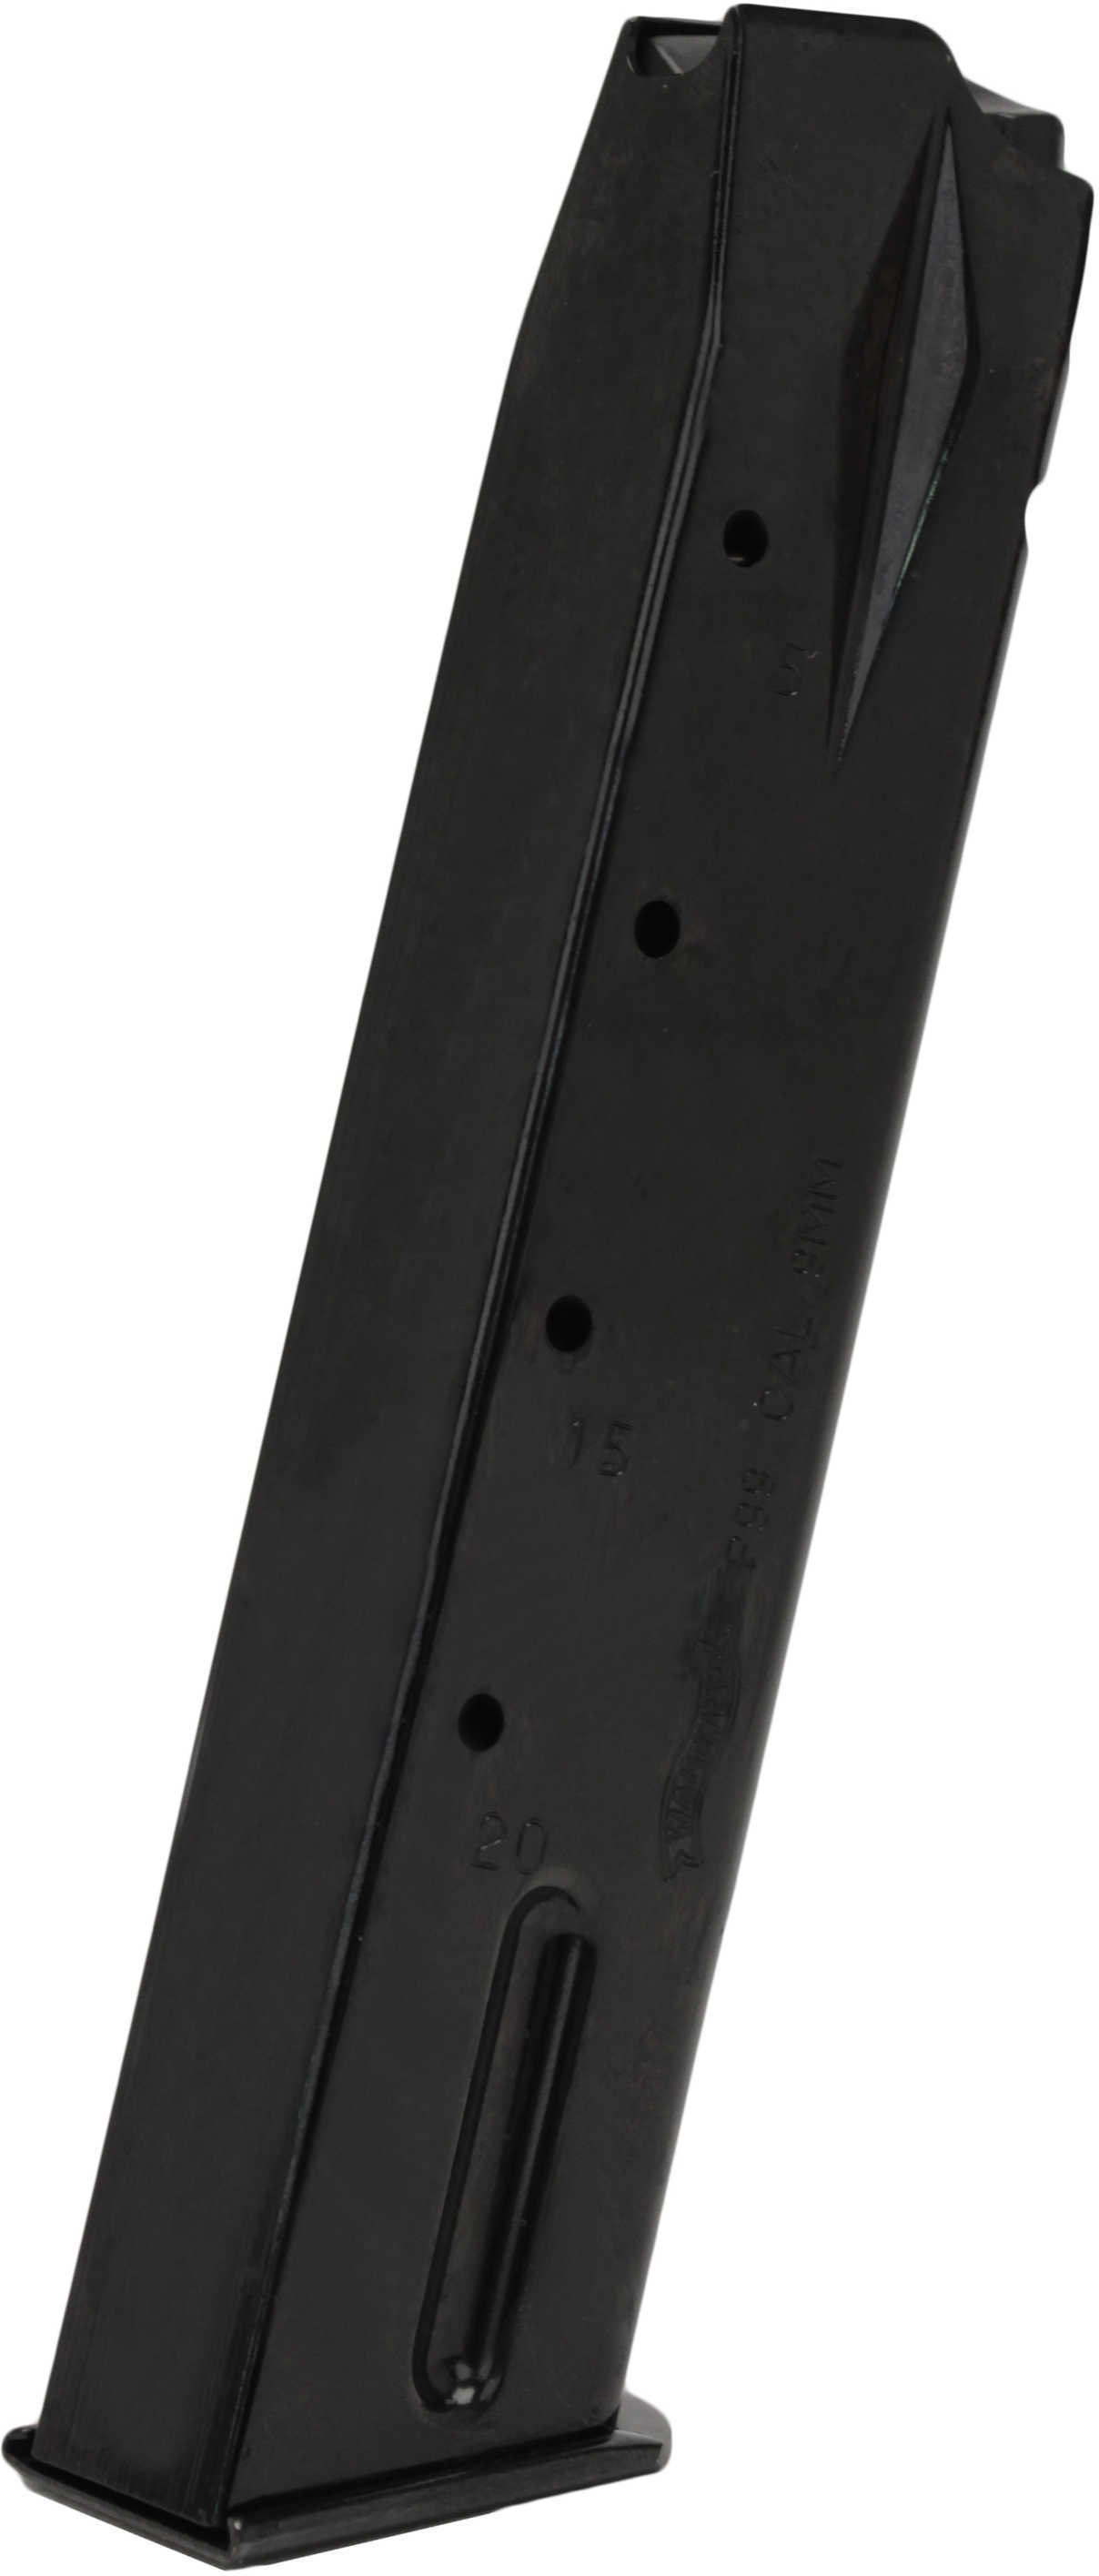 Walther P99 Extended Magazine 9mm Black 20/Rd